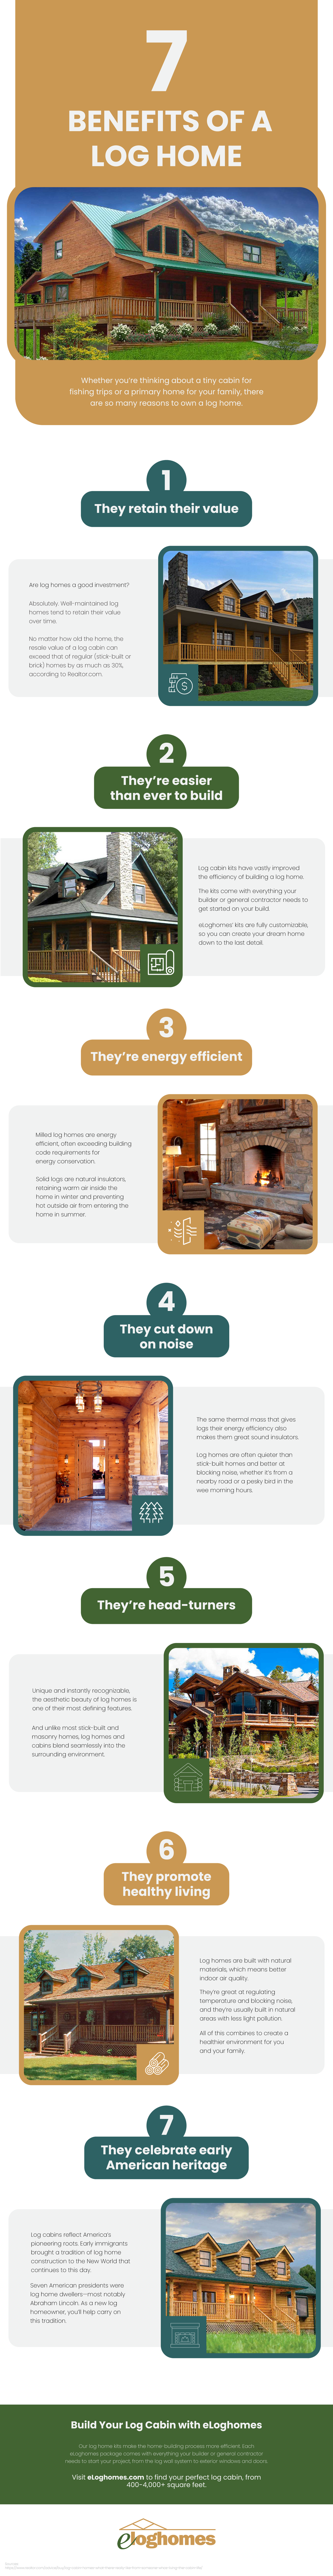 7 Benefits of a Log Home Infographic